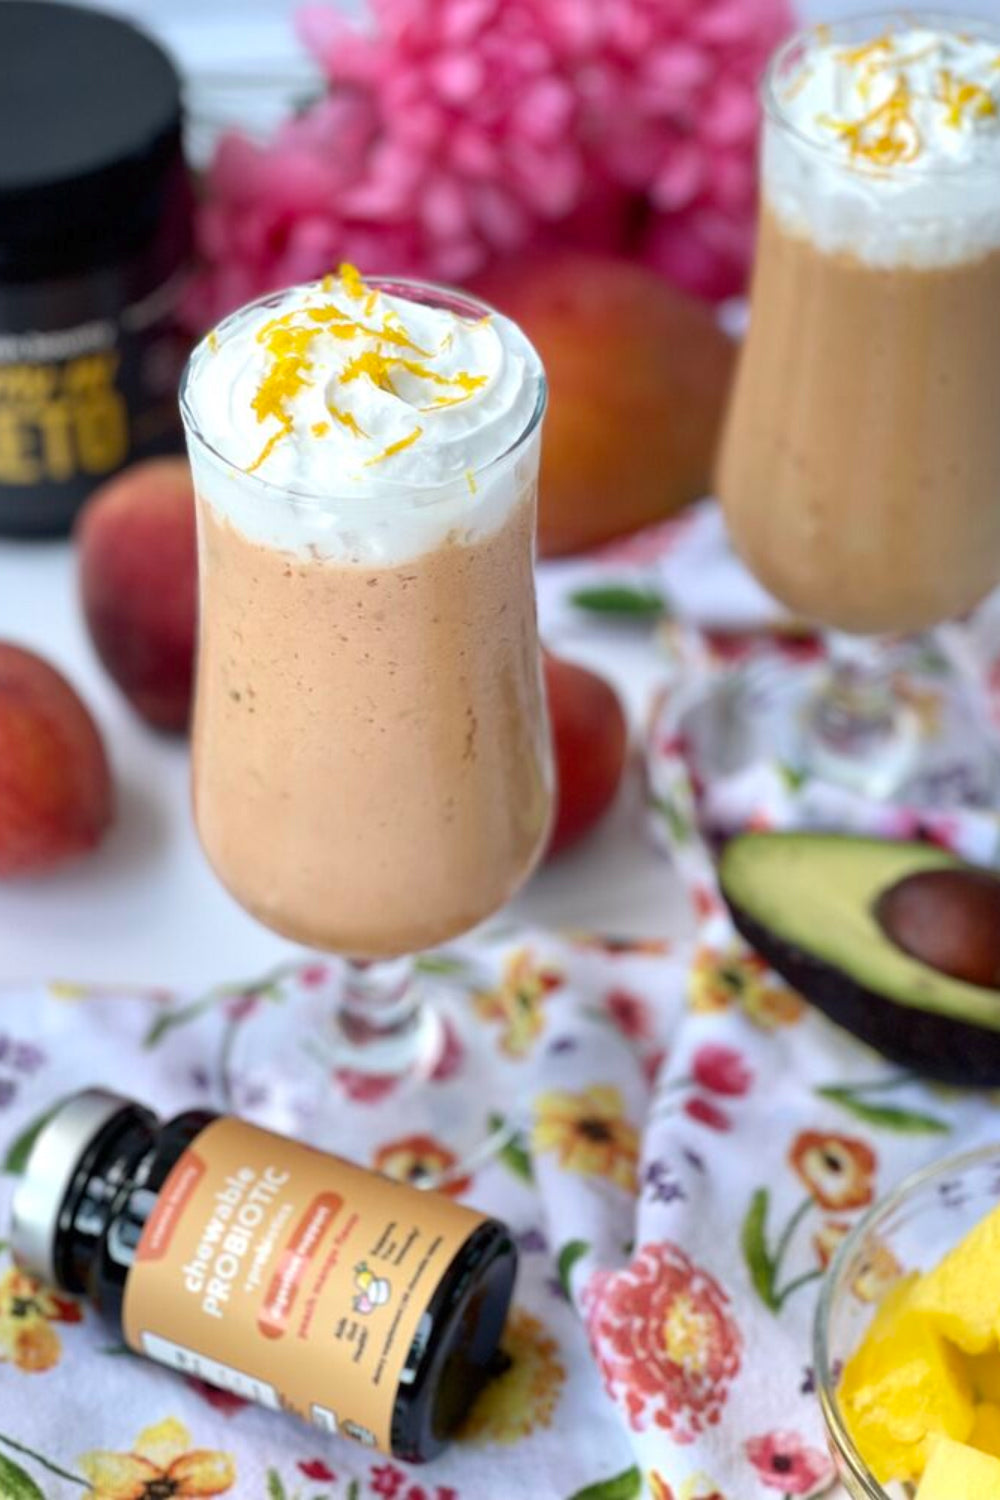 Probiotic Peach Mango Smoothie made with Vitamin Bounty Probiotic Chewable